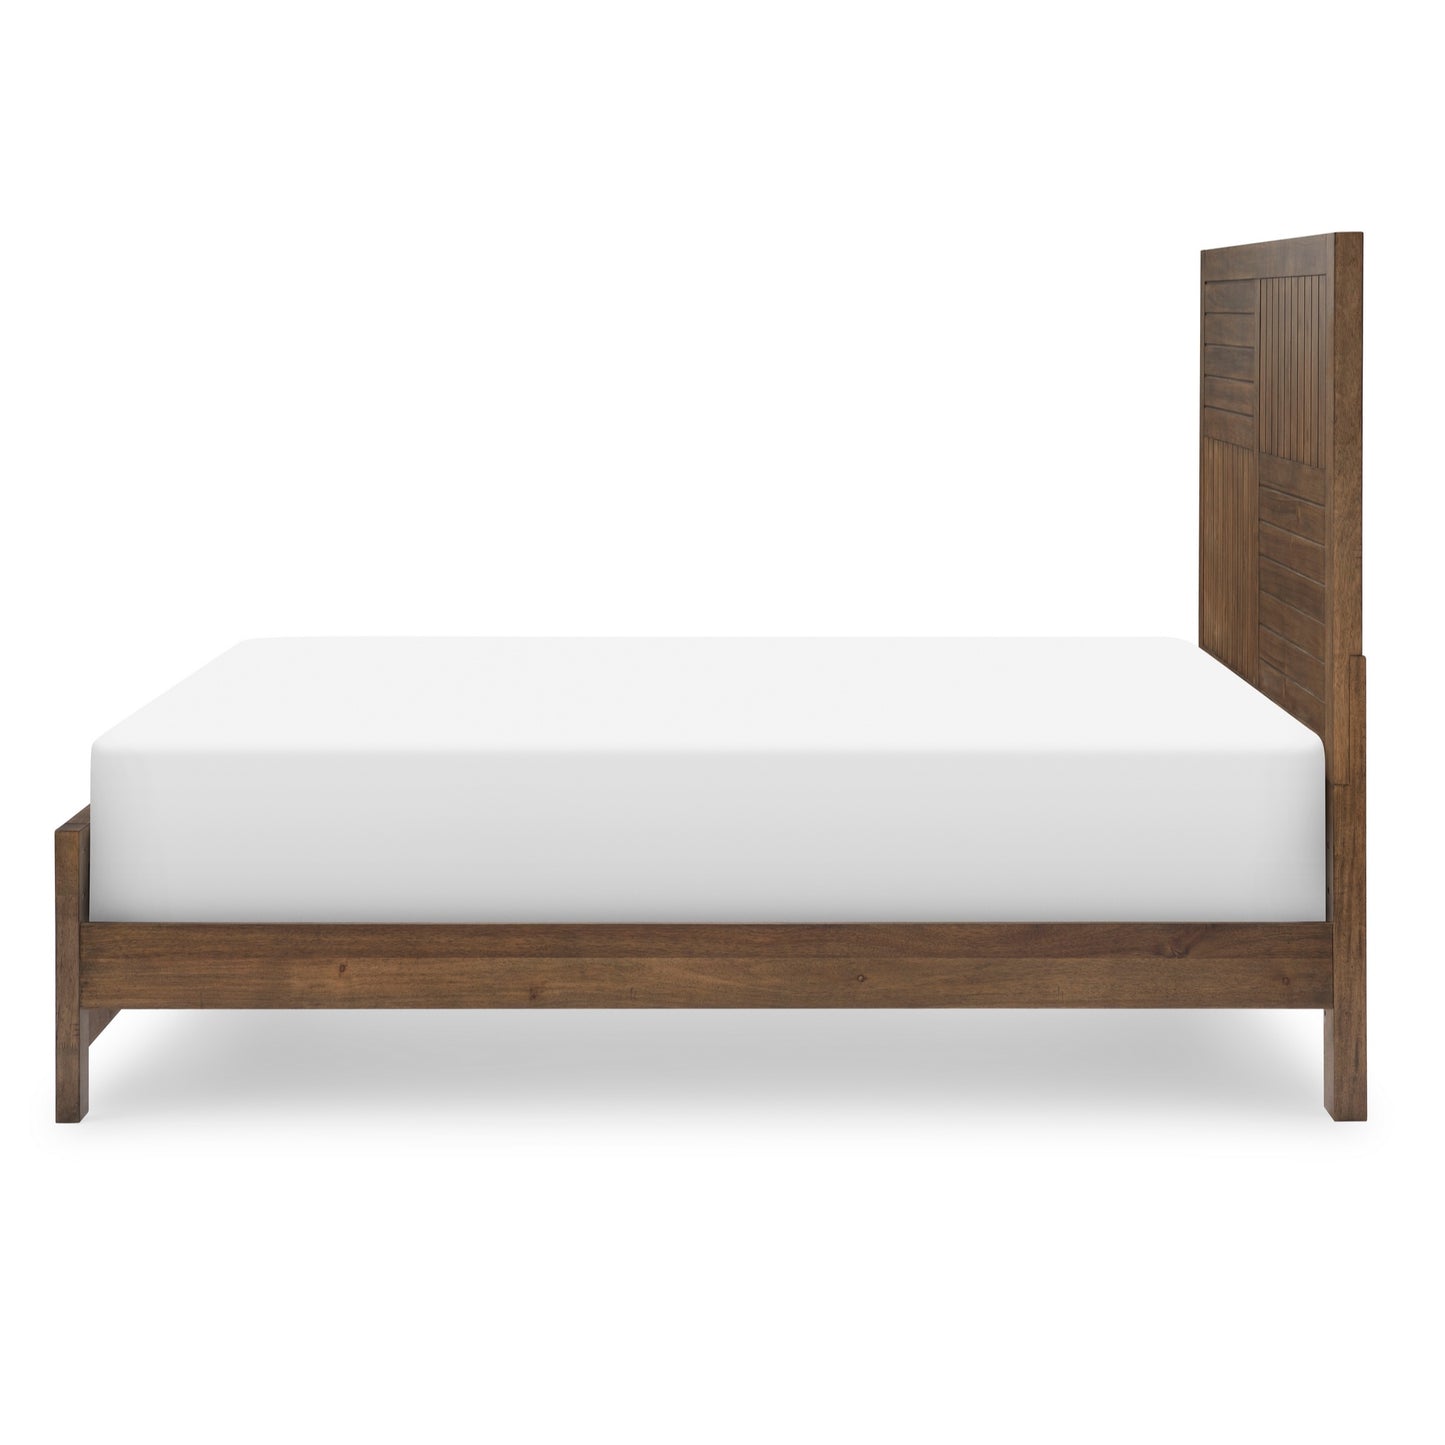 Summer Camp Full Panel Bed - Brown